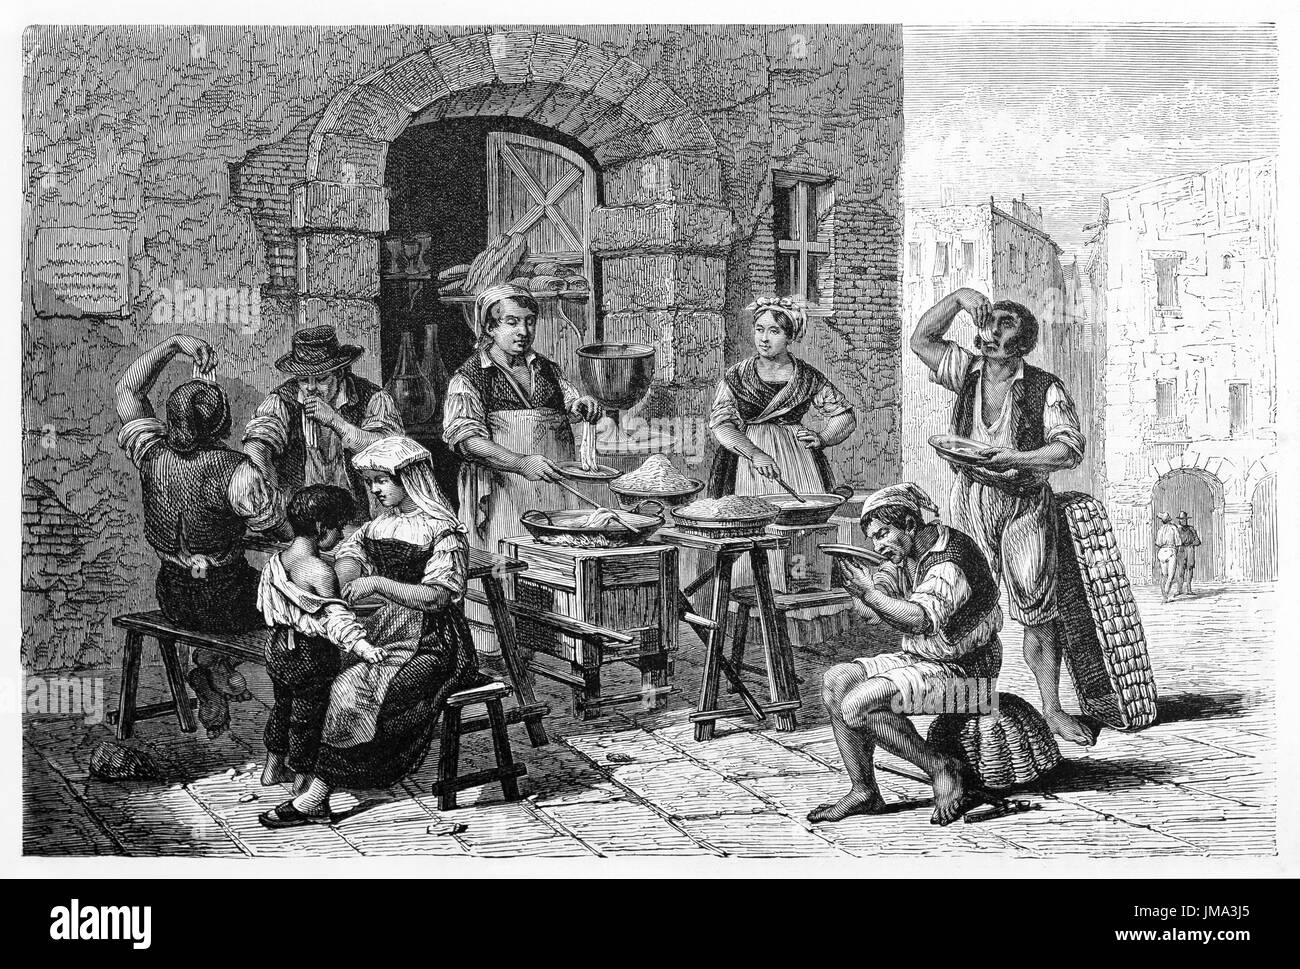 Old illustration of Macaroni seller and customers, Neaples, Italy. Created by Bergue, published on Le Tour du Monde, Paris, 1861 Stock Photo